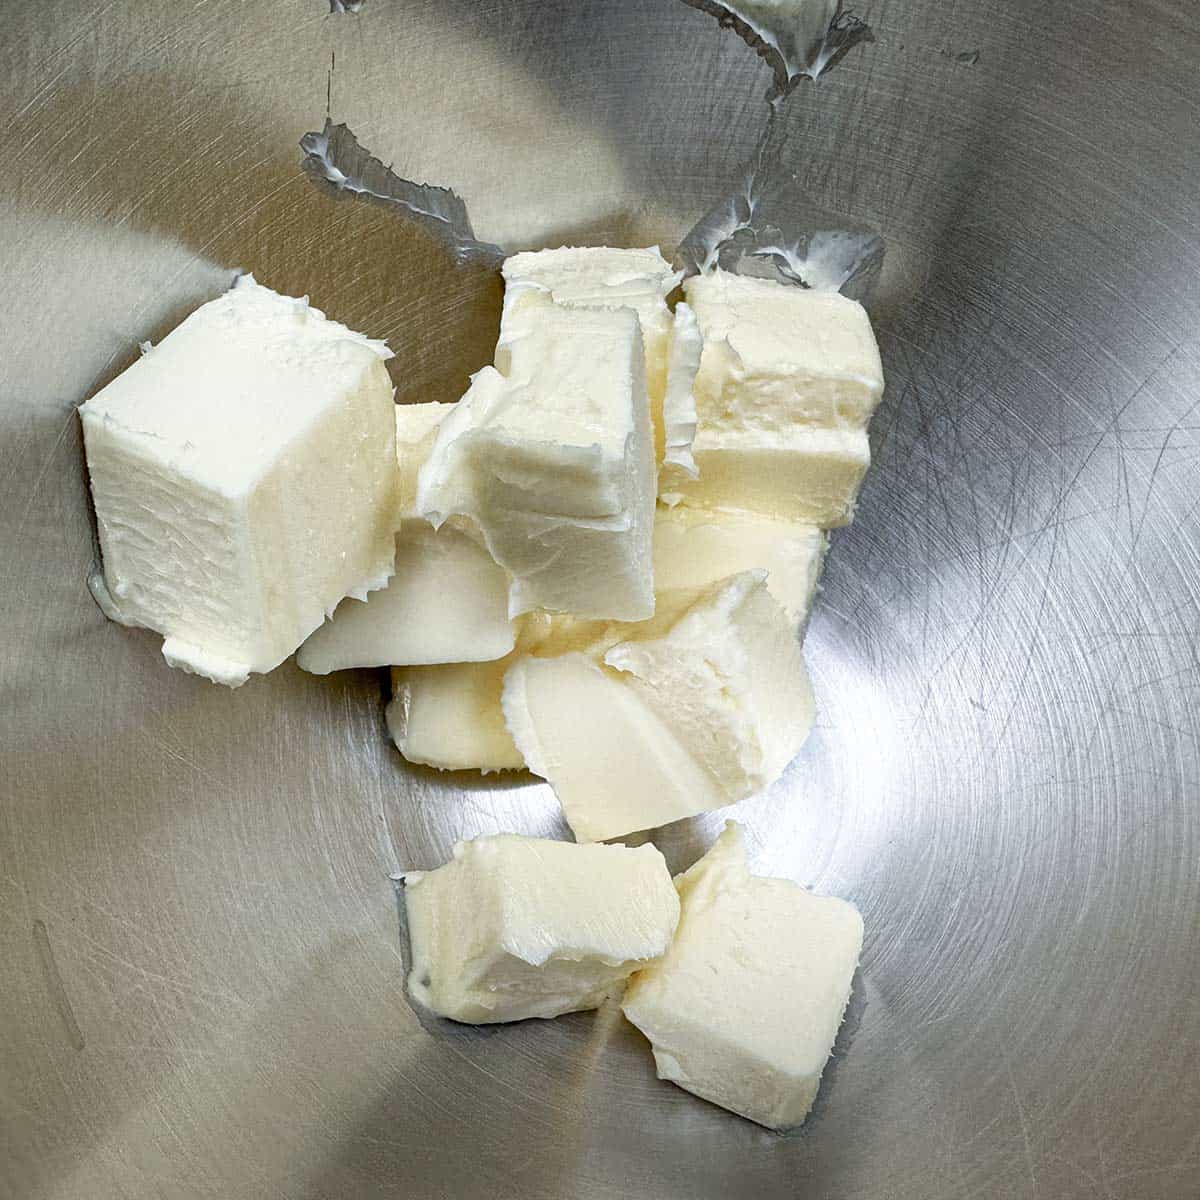 Cubed butter in a mixer bowl